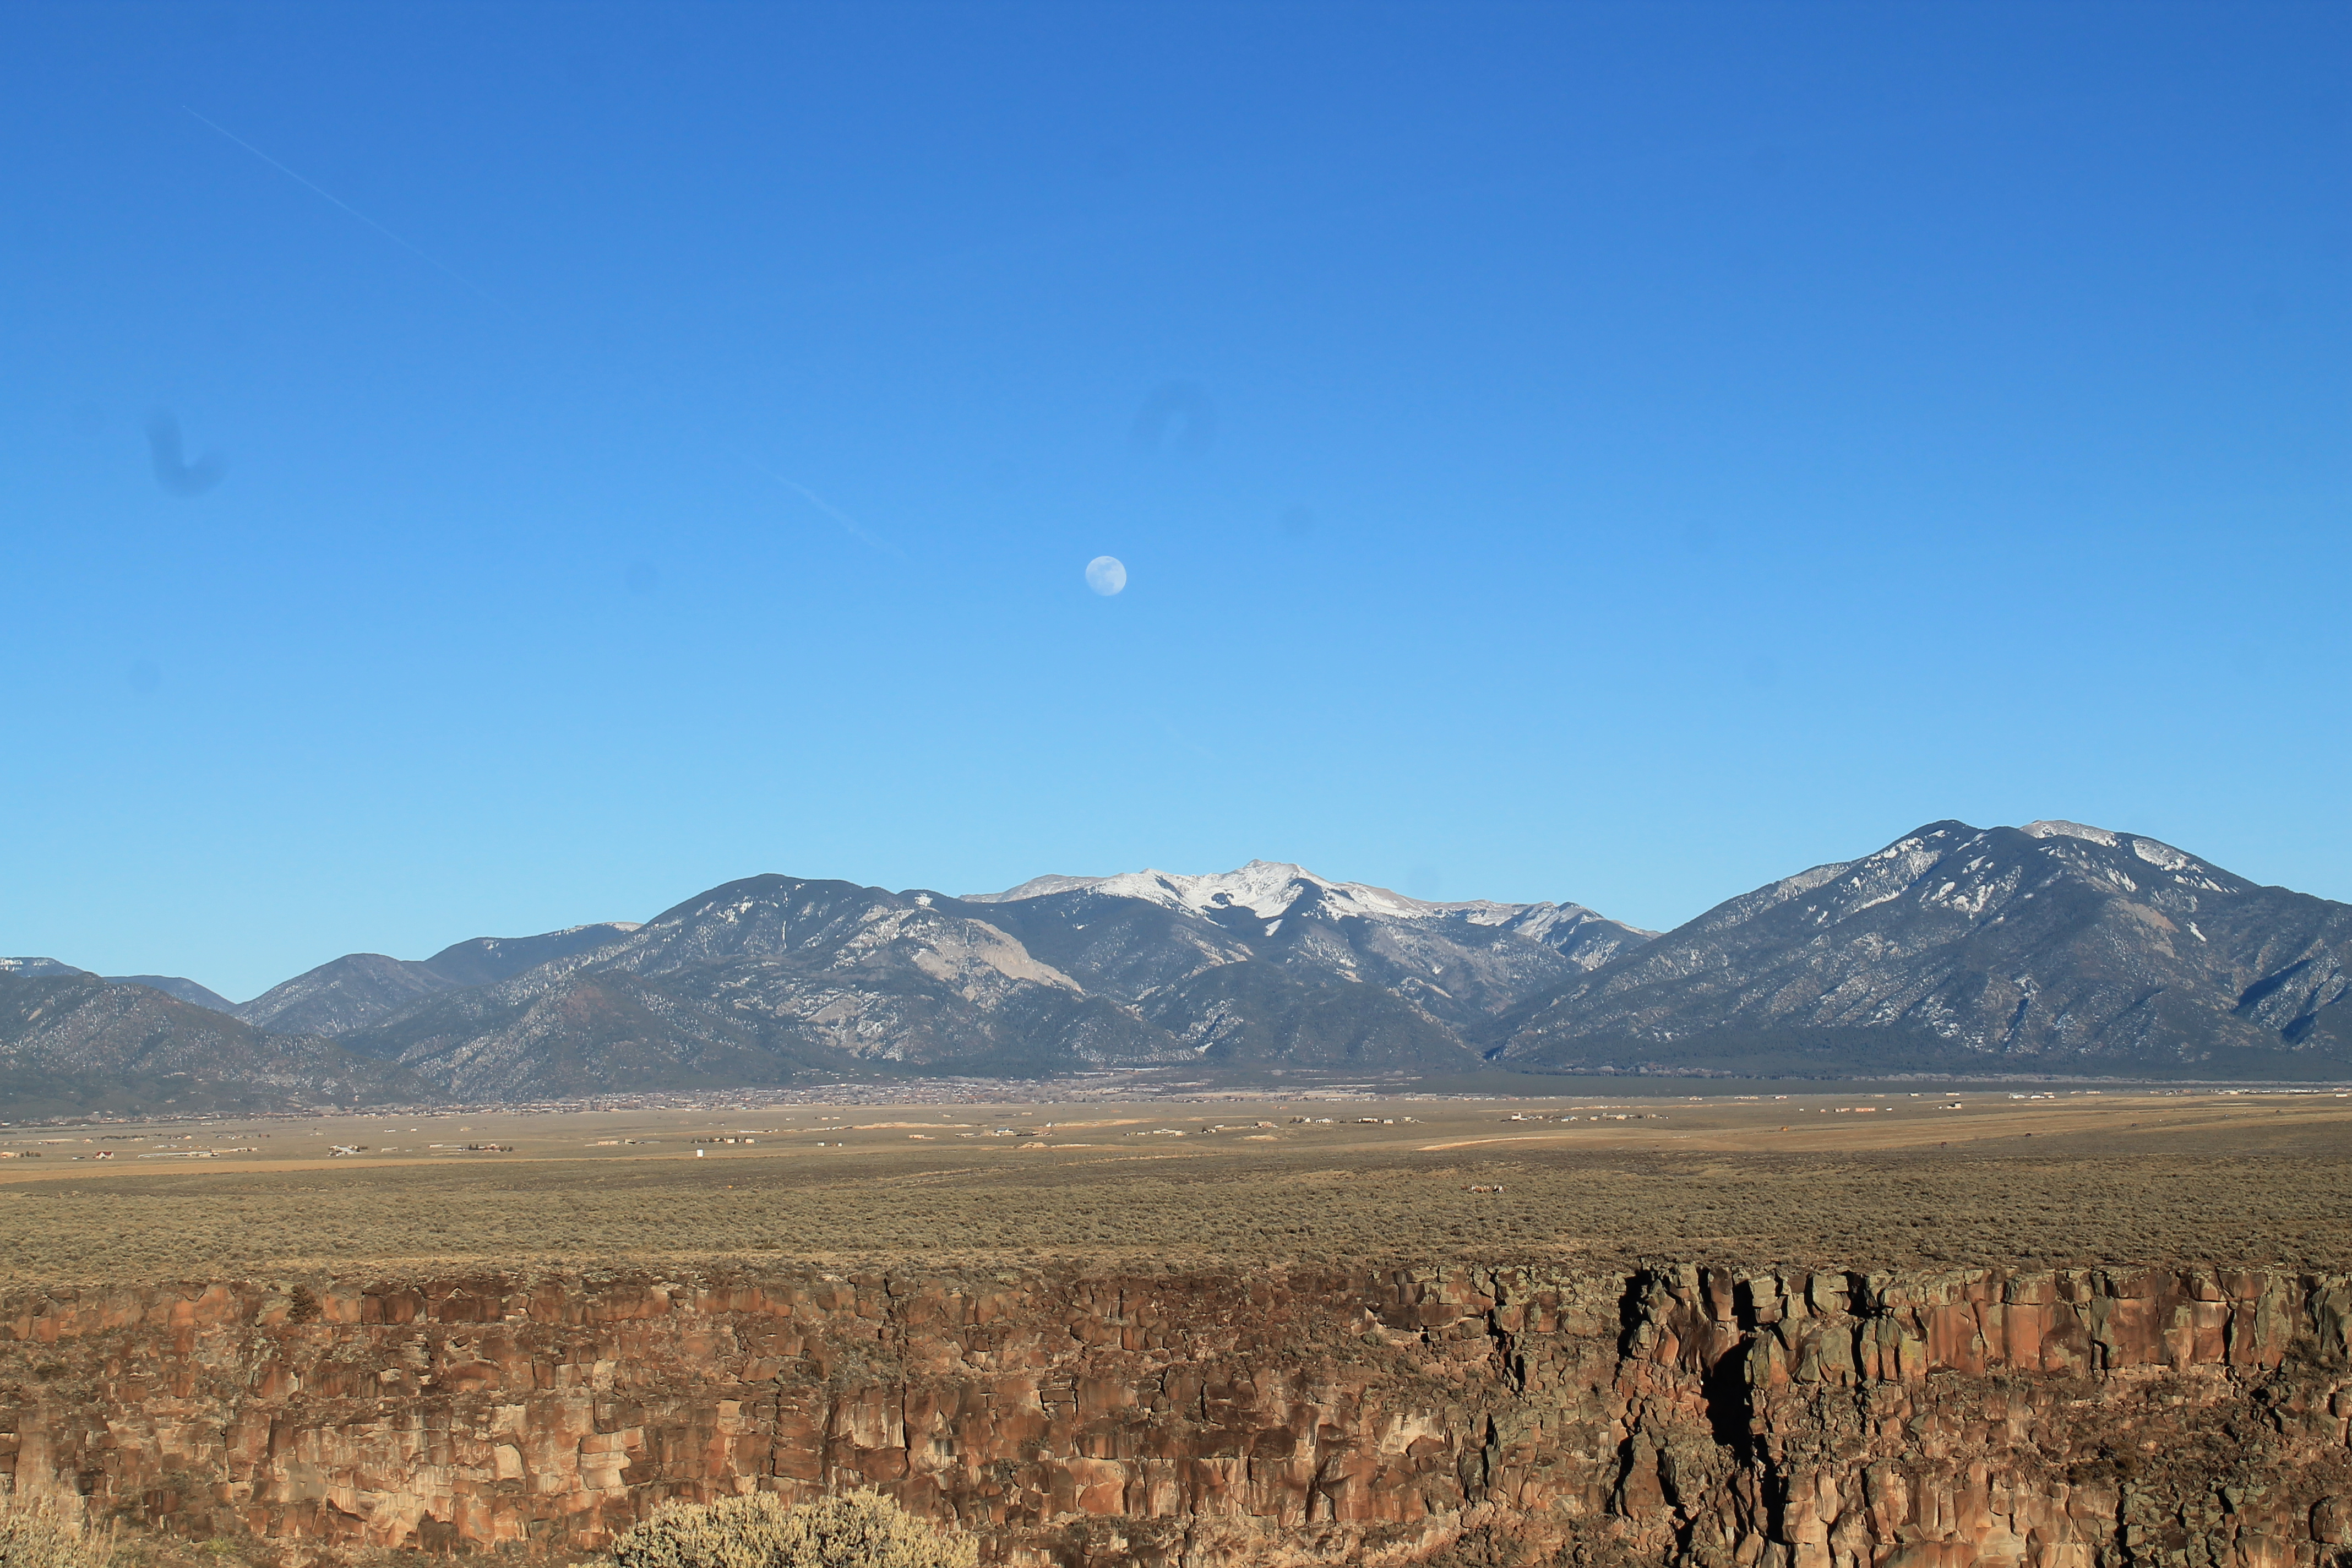 A beautiful moon rose early in Taos, New Mexico as we hiked the West Rim Trail.